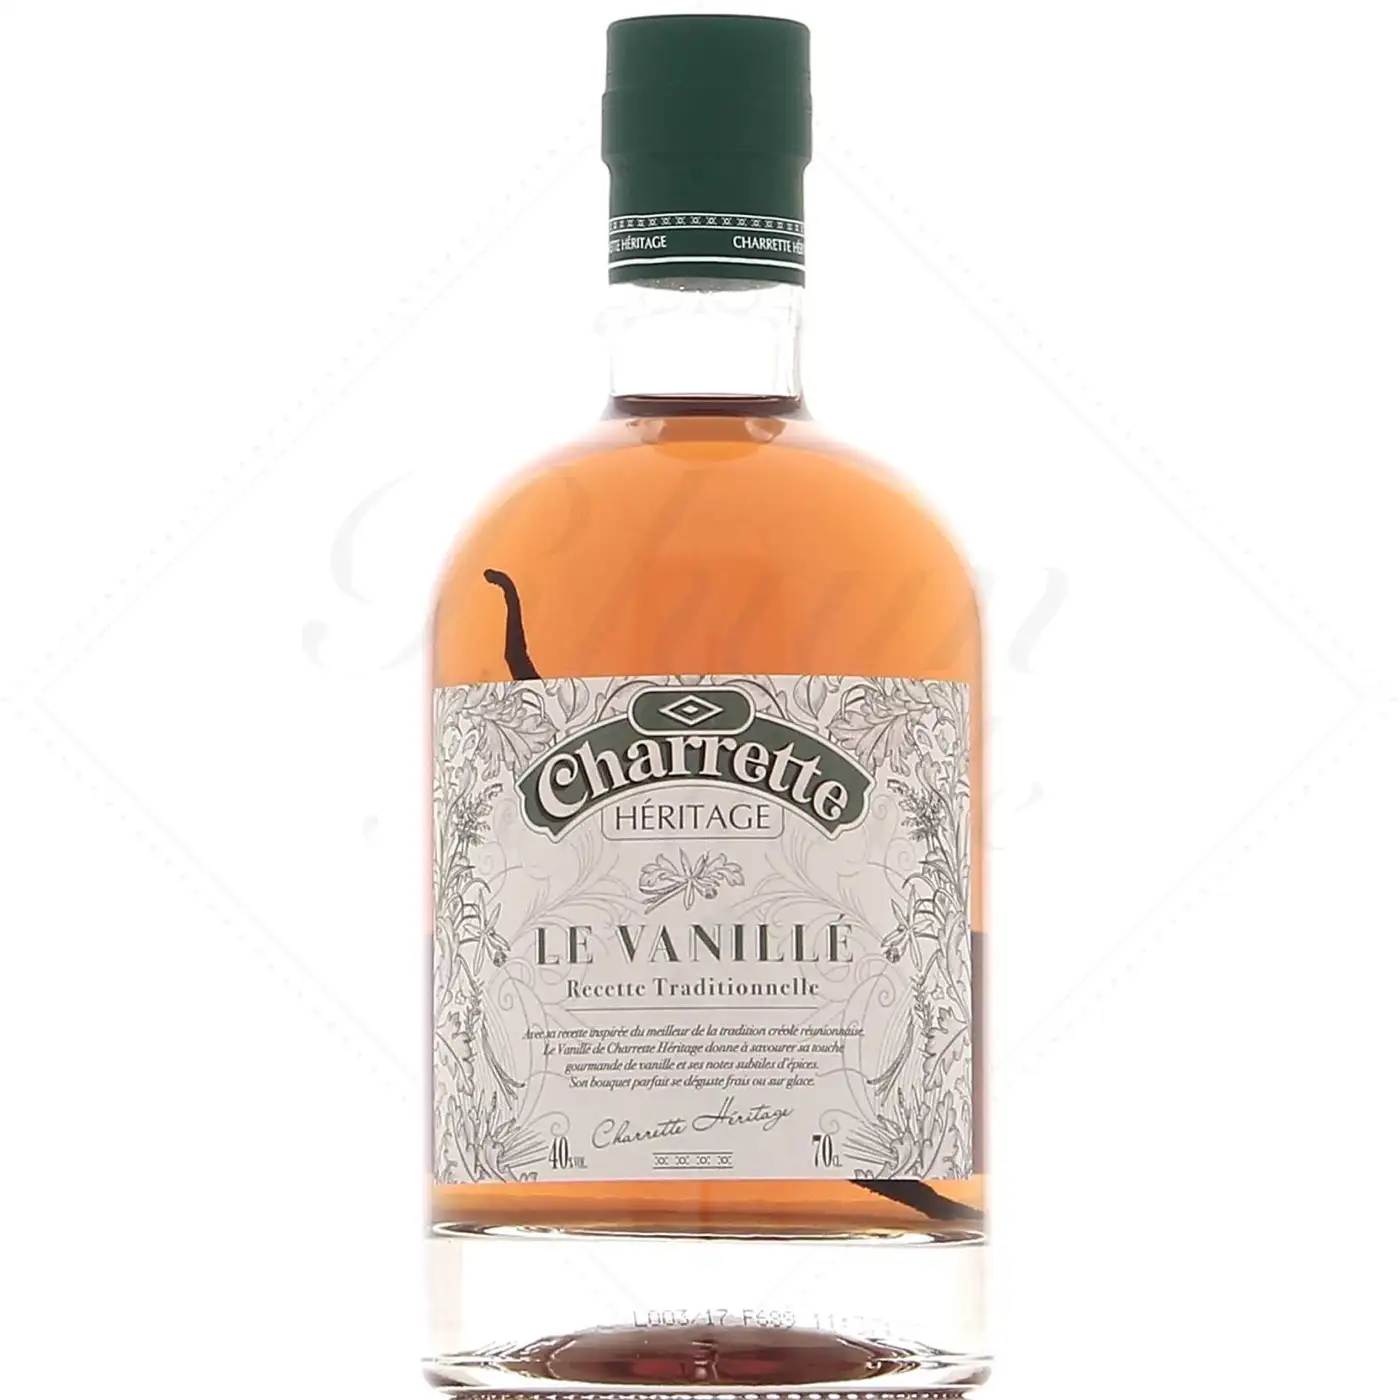 Image of the front of the bottle of the rum Héritage Le Vanillé